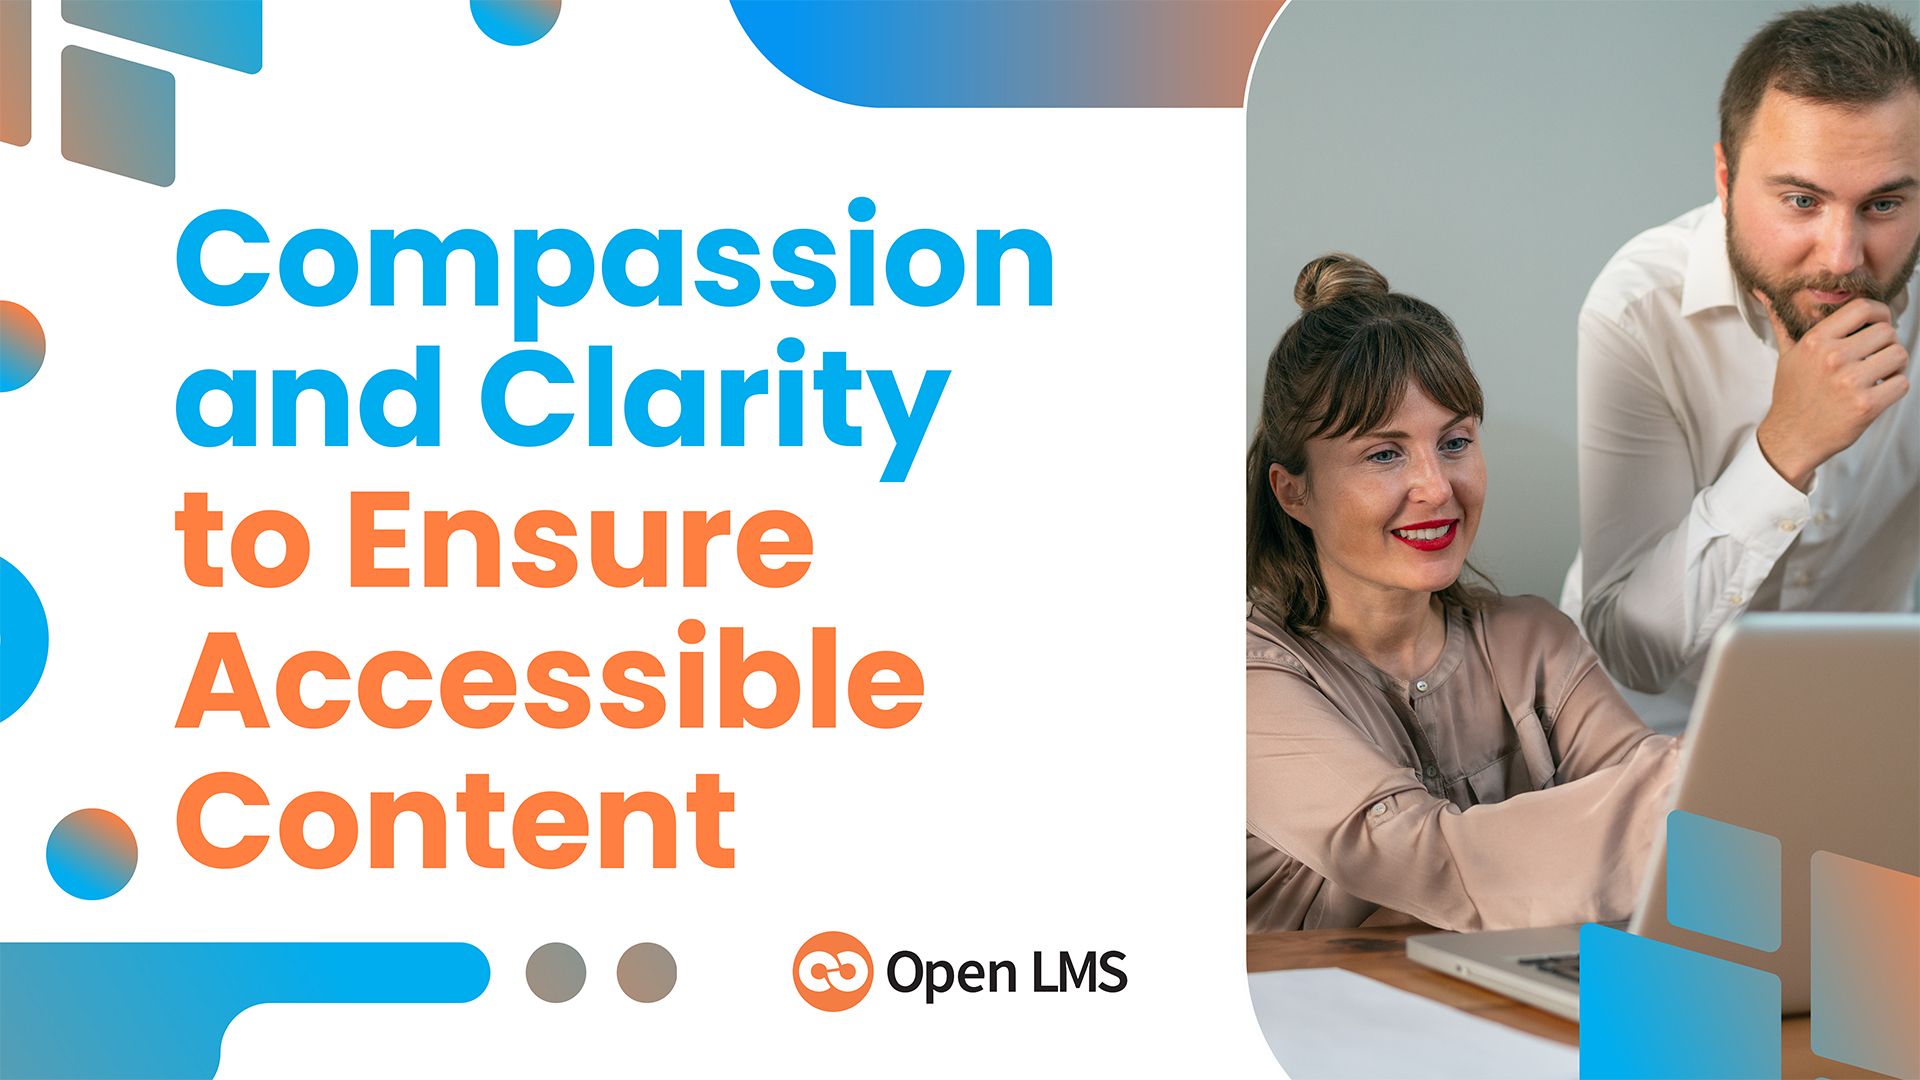 6 Ways You Can Use Compassion and Clarity to Ensure Online Learning Remains Accessible